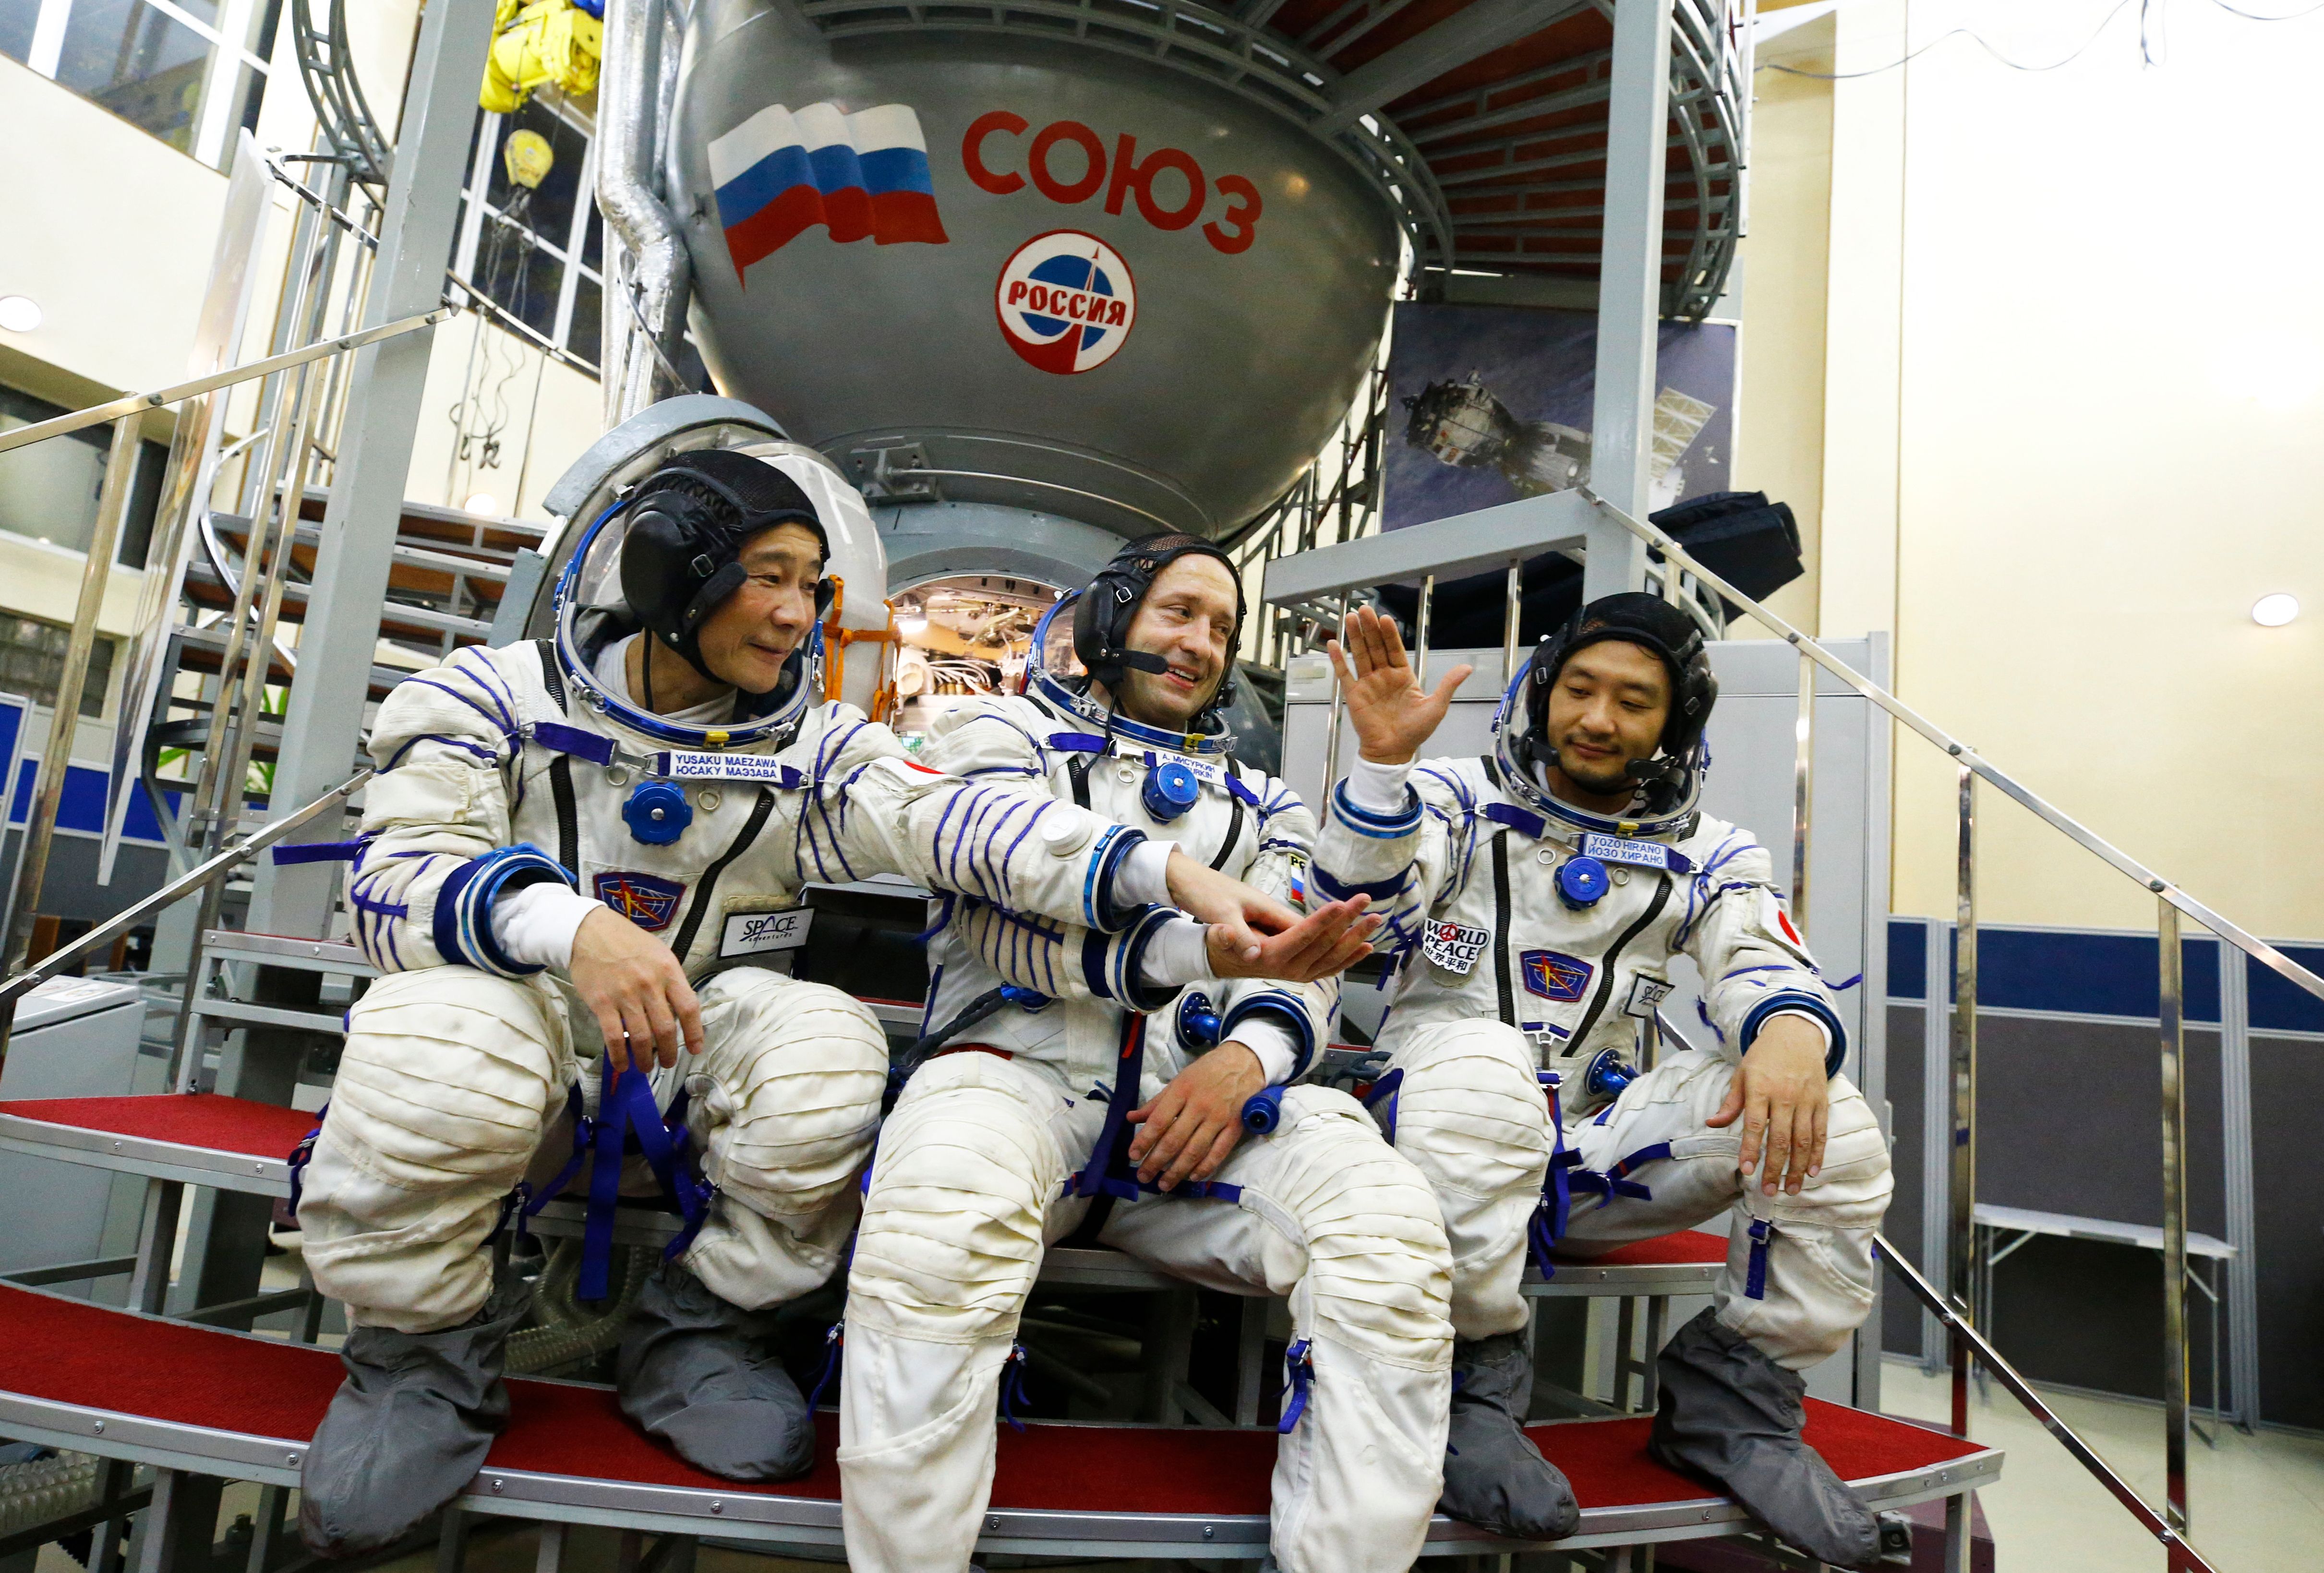 Russian cosmonaut Alexander Misurkin (centre) and Japanese space flight participants, billionaire Yusaku Maezawa (left) and his assistant Yozo Hirano, pictured in Moscow on 14 October